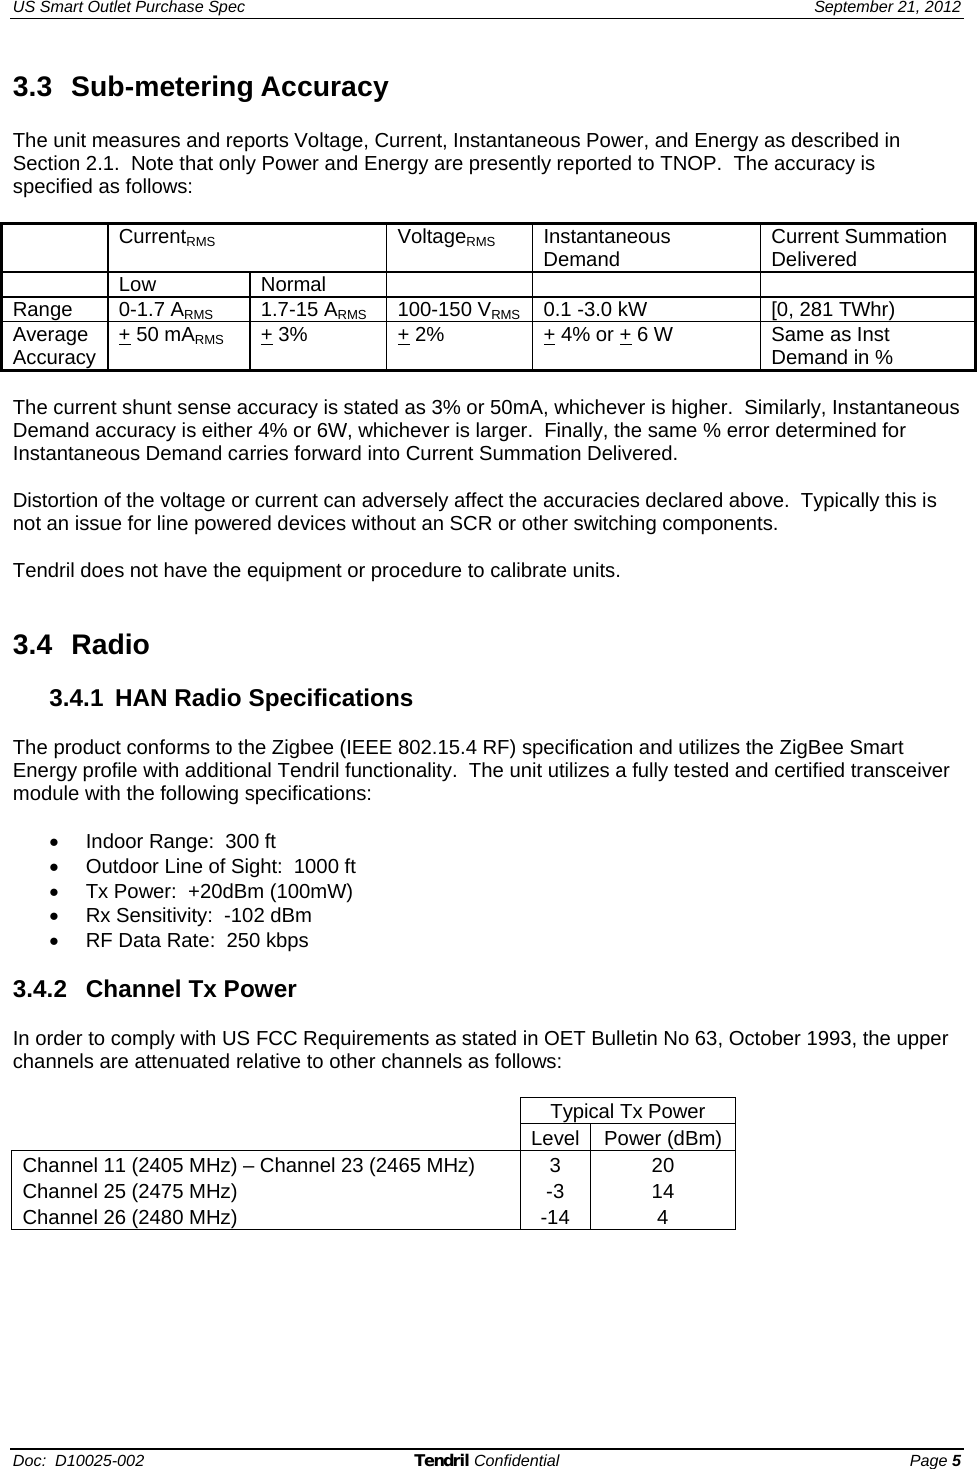 US Smart Outlet Purchase Spec   September 21, 2012 Doc:  D10025-002 Tendril Confidential Page 5 3.3 Sub-metering Accuracy  The unit measures and reports Voltage, Current, Instantaneous Power, and Energy as described in Section 2.1.  Note that only Power and Energy are presently reported to TNOP.  The accuracy is specified as follows:   CurrentRMS VoltageRMS Instantaneous Demand Current Summation Delivered  Low Normal      Range  0-1.7 ARMS  1.7-15 ARMS  100-150 VRMS 0.1 -3.0 kW [0, 281 TWhr) Average Accuracy  + 50 mARMS + 3%  + 2% + 4% or + 6 W Same as Inst Demand in %  The current shunt sense accuracy is stated as 3% or 50mA, whichever is higher.  Similarly, Instantaneous Demand accuracy is either 4% or 6W, whichever is larger.  Finally, the same % error determined for Instantaneous Demand carries forward into Current Summation Delivered.  Distortion of the voltage or current can adversely affect the accuracies declared above.  Typically this is not an issue for line powered devices without an SCR or other switching components.  Tendril does not have the equipment or procedure to calibrate units.     3.4 Radio  3.4.1 HAN Radio Specifications  The product conforms to the Zigbee (IEEE 802.15.4 RF) specification and utilizes the ZigBee Smart Energy profile with additional Tendril functionality.  The unit utilizes a fully tested and certified transceiver module with the following specifications:  •  Indoor Range:  300 ft •  Outdoor Line of Sight:  1000 ft •  Tx Power:  +20dBm (100mW) •  Rx Sensitivity:  -102 dBm •  RF Data Rate:  250 kbps  3.4.2  Channel Tx Power  In order to comply with US FCC Requirements as stated in OET Bulletin No 63, October 1993, the upper channels are attenuated relative to other channels as follows:   Typical Tx Power  Level Power (dBm)Channel 11 (2405 MHz) – Channel 23 (2465 MHz)   3  20 Channel 25 (2475 MHz)  -3  14 Channel 26 (2480 MHz)   -14  4  